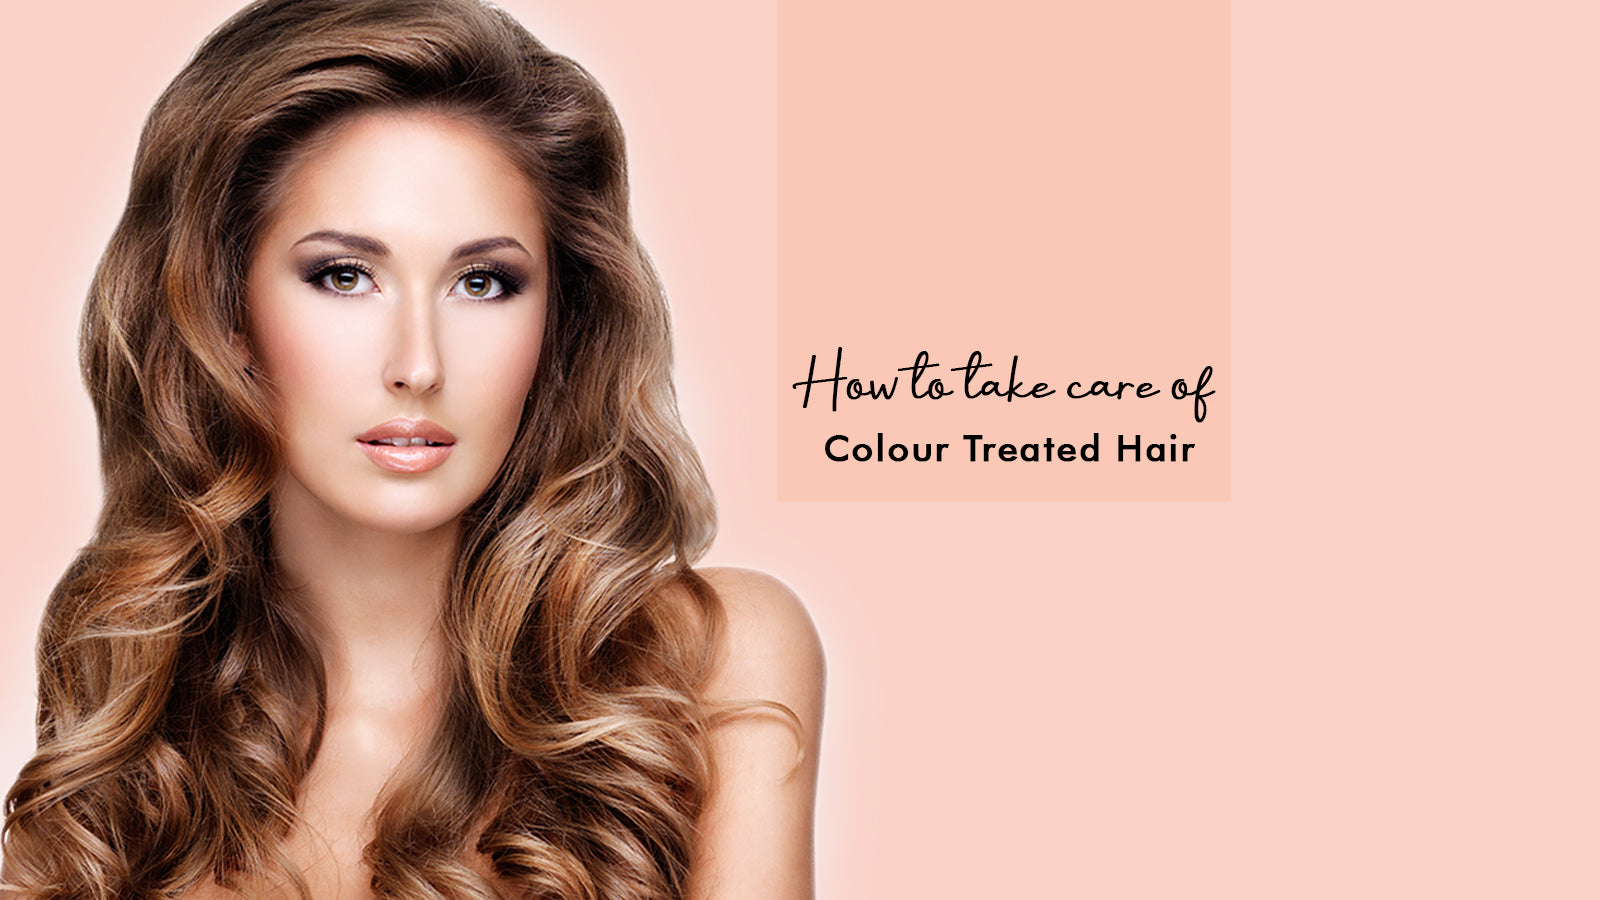 How To Take Care Of Coloured Treated Hair?